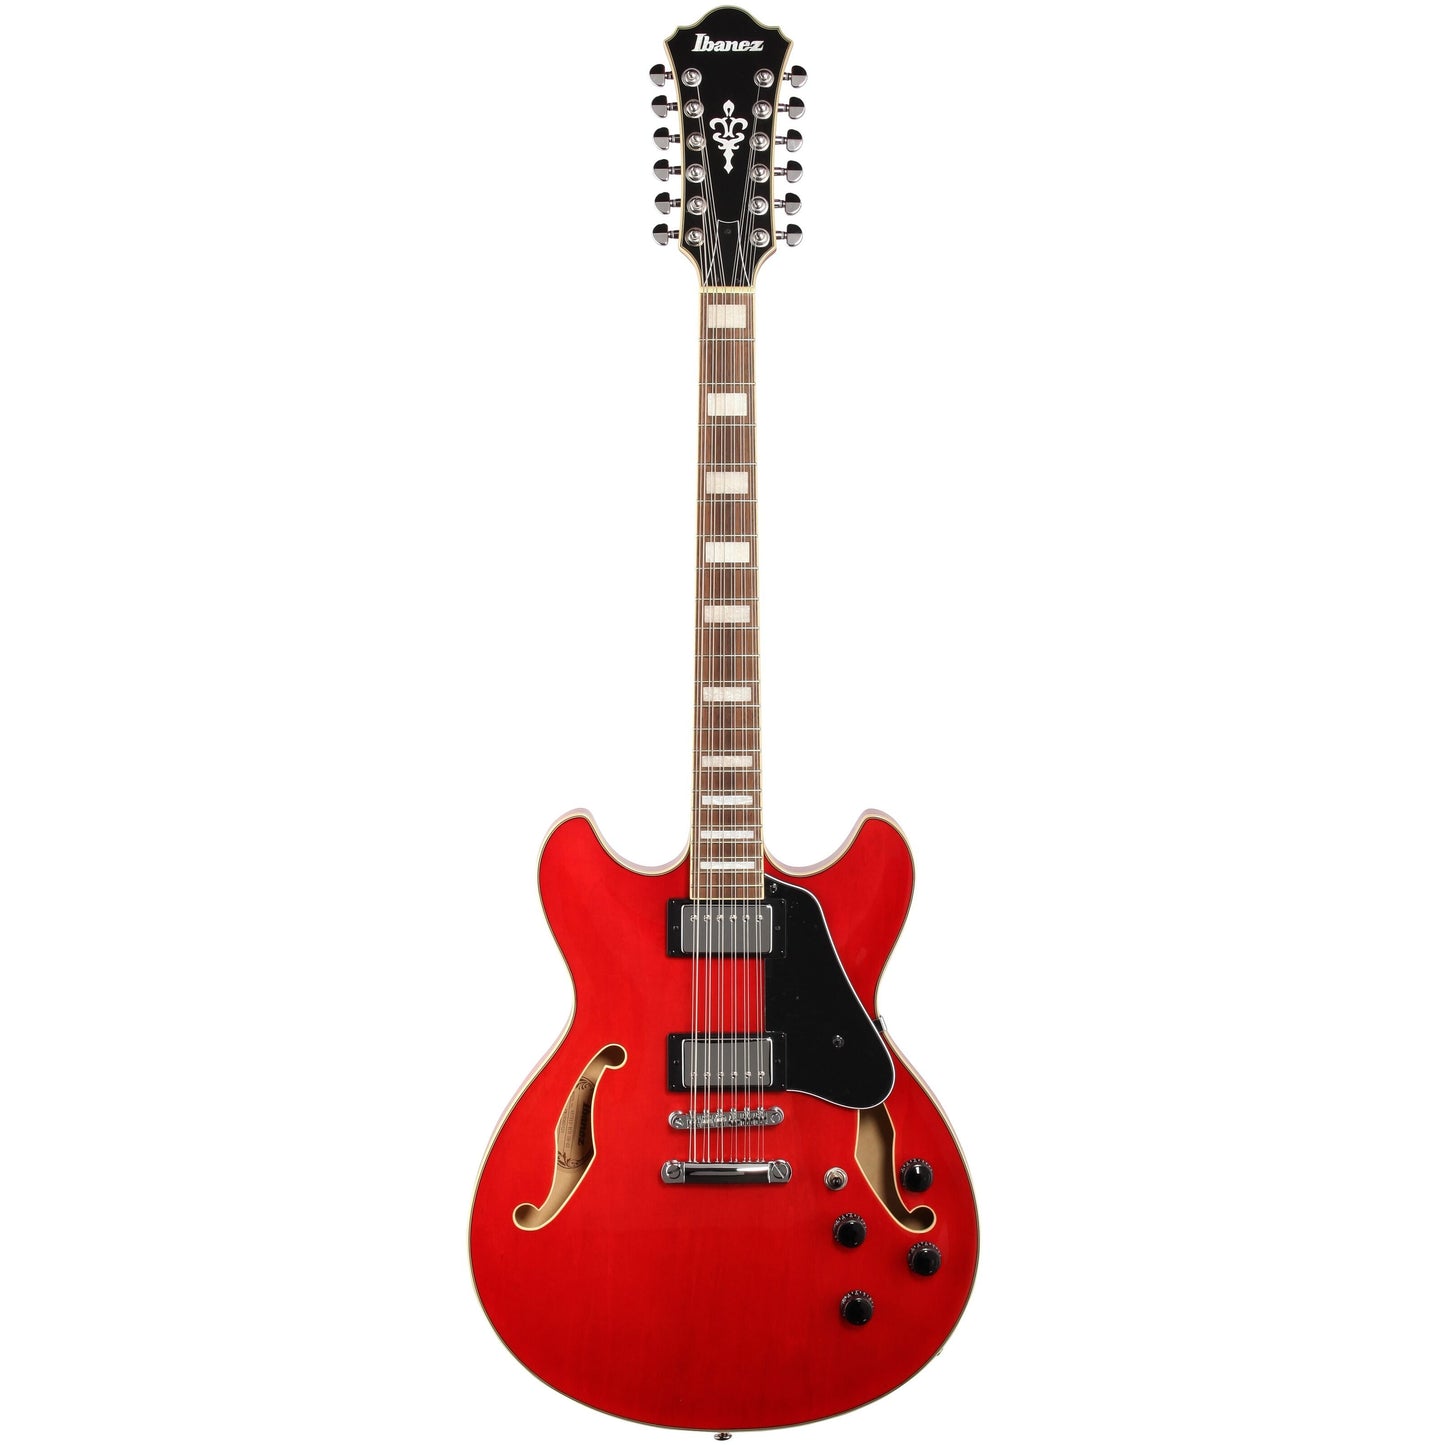 Ibanez Artcore AS7312 Electric Guitar, 12-String, Transparent Cherry Red